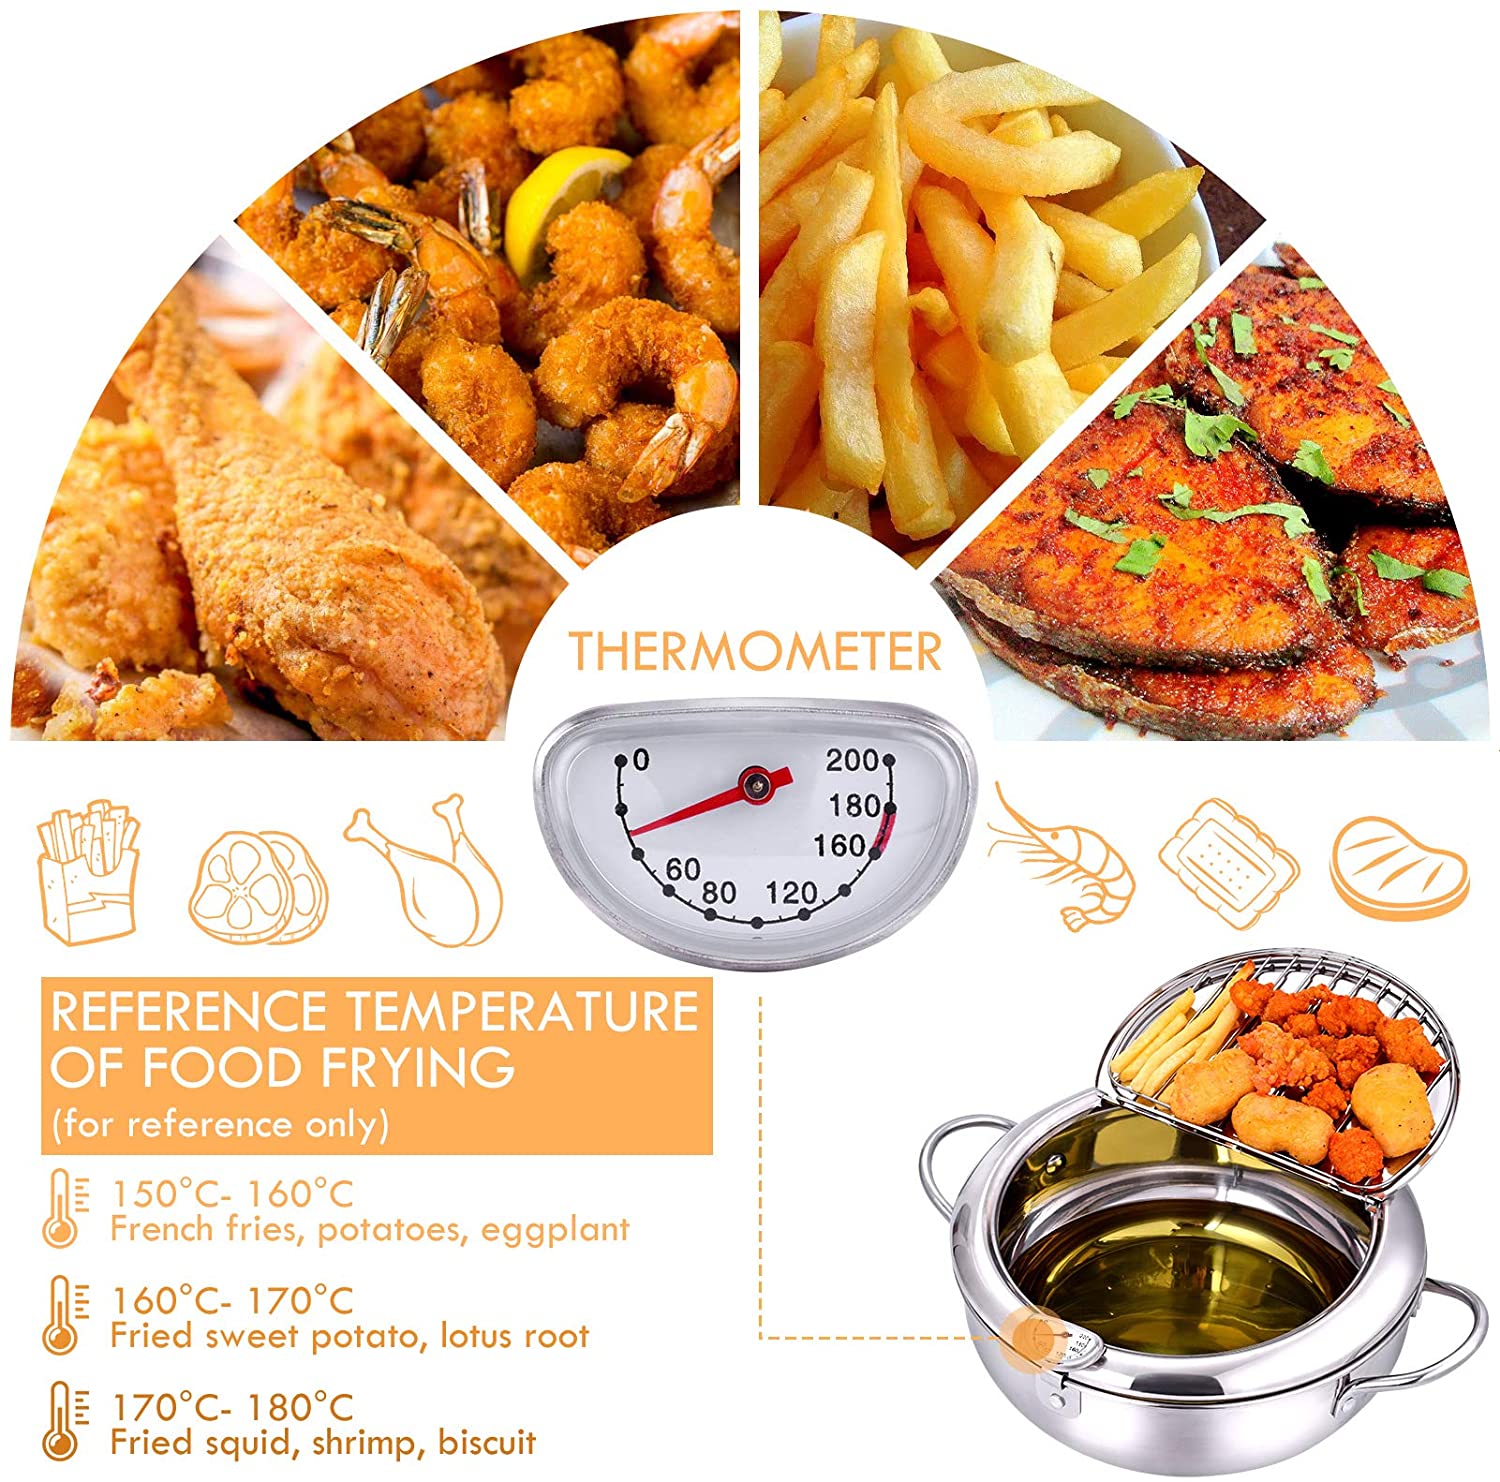 Banggood 24cm Fryer with Thermometer and Lid 2L 304 Stainless Steel Oil Filter Pot for Kitchen